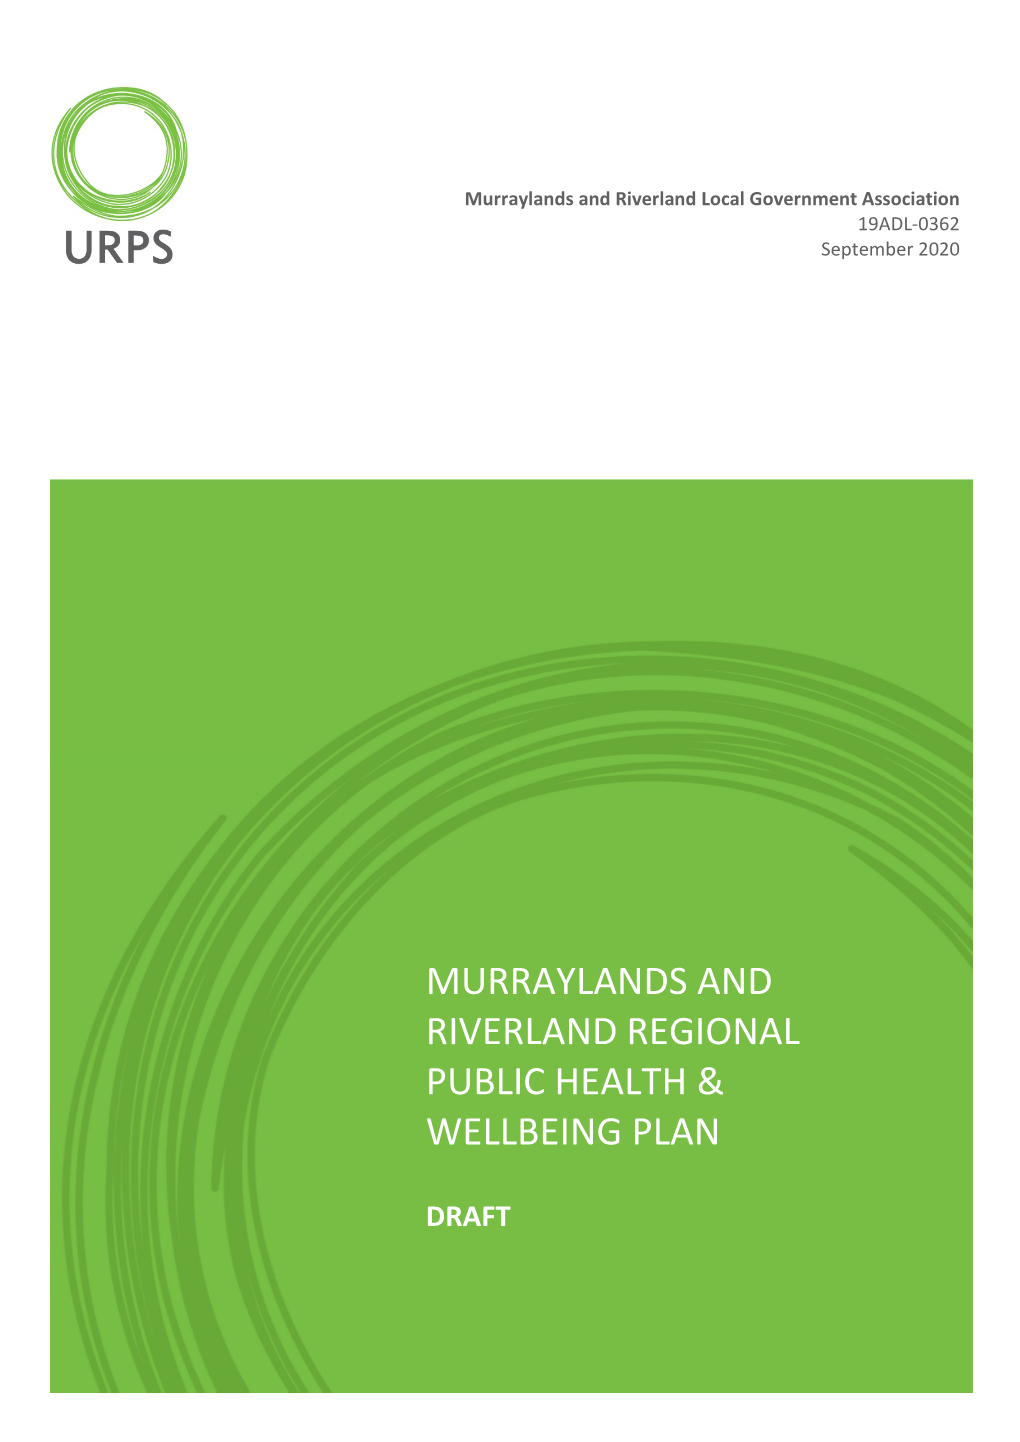 Murraylands and Riverland Regional Public Health & Wellbeing Plan